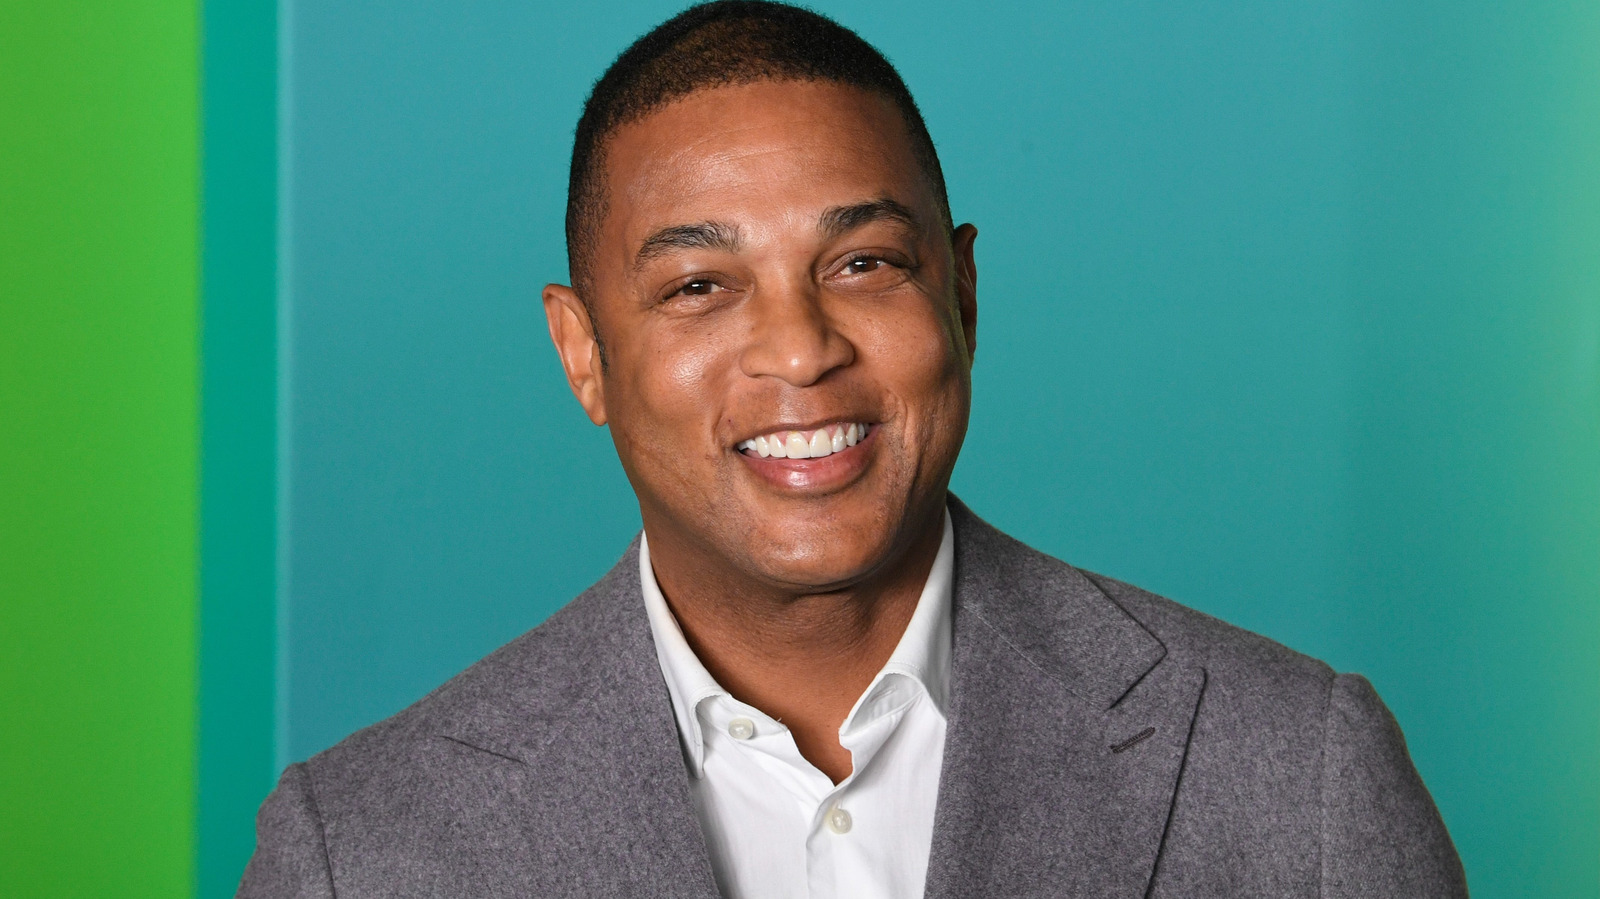 Don Lemon Says He's Not 'Perfect' In First Interview After CNN Firing ...